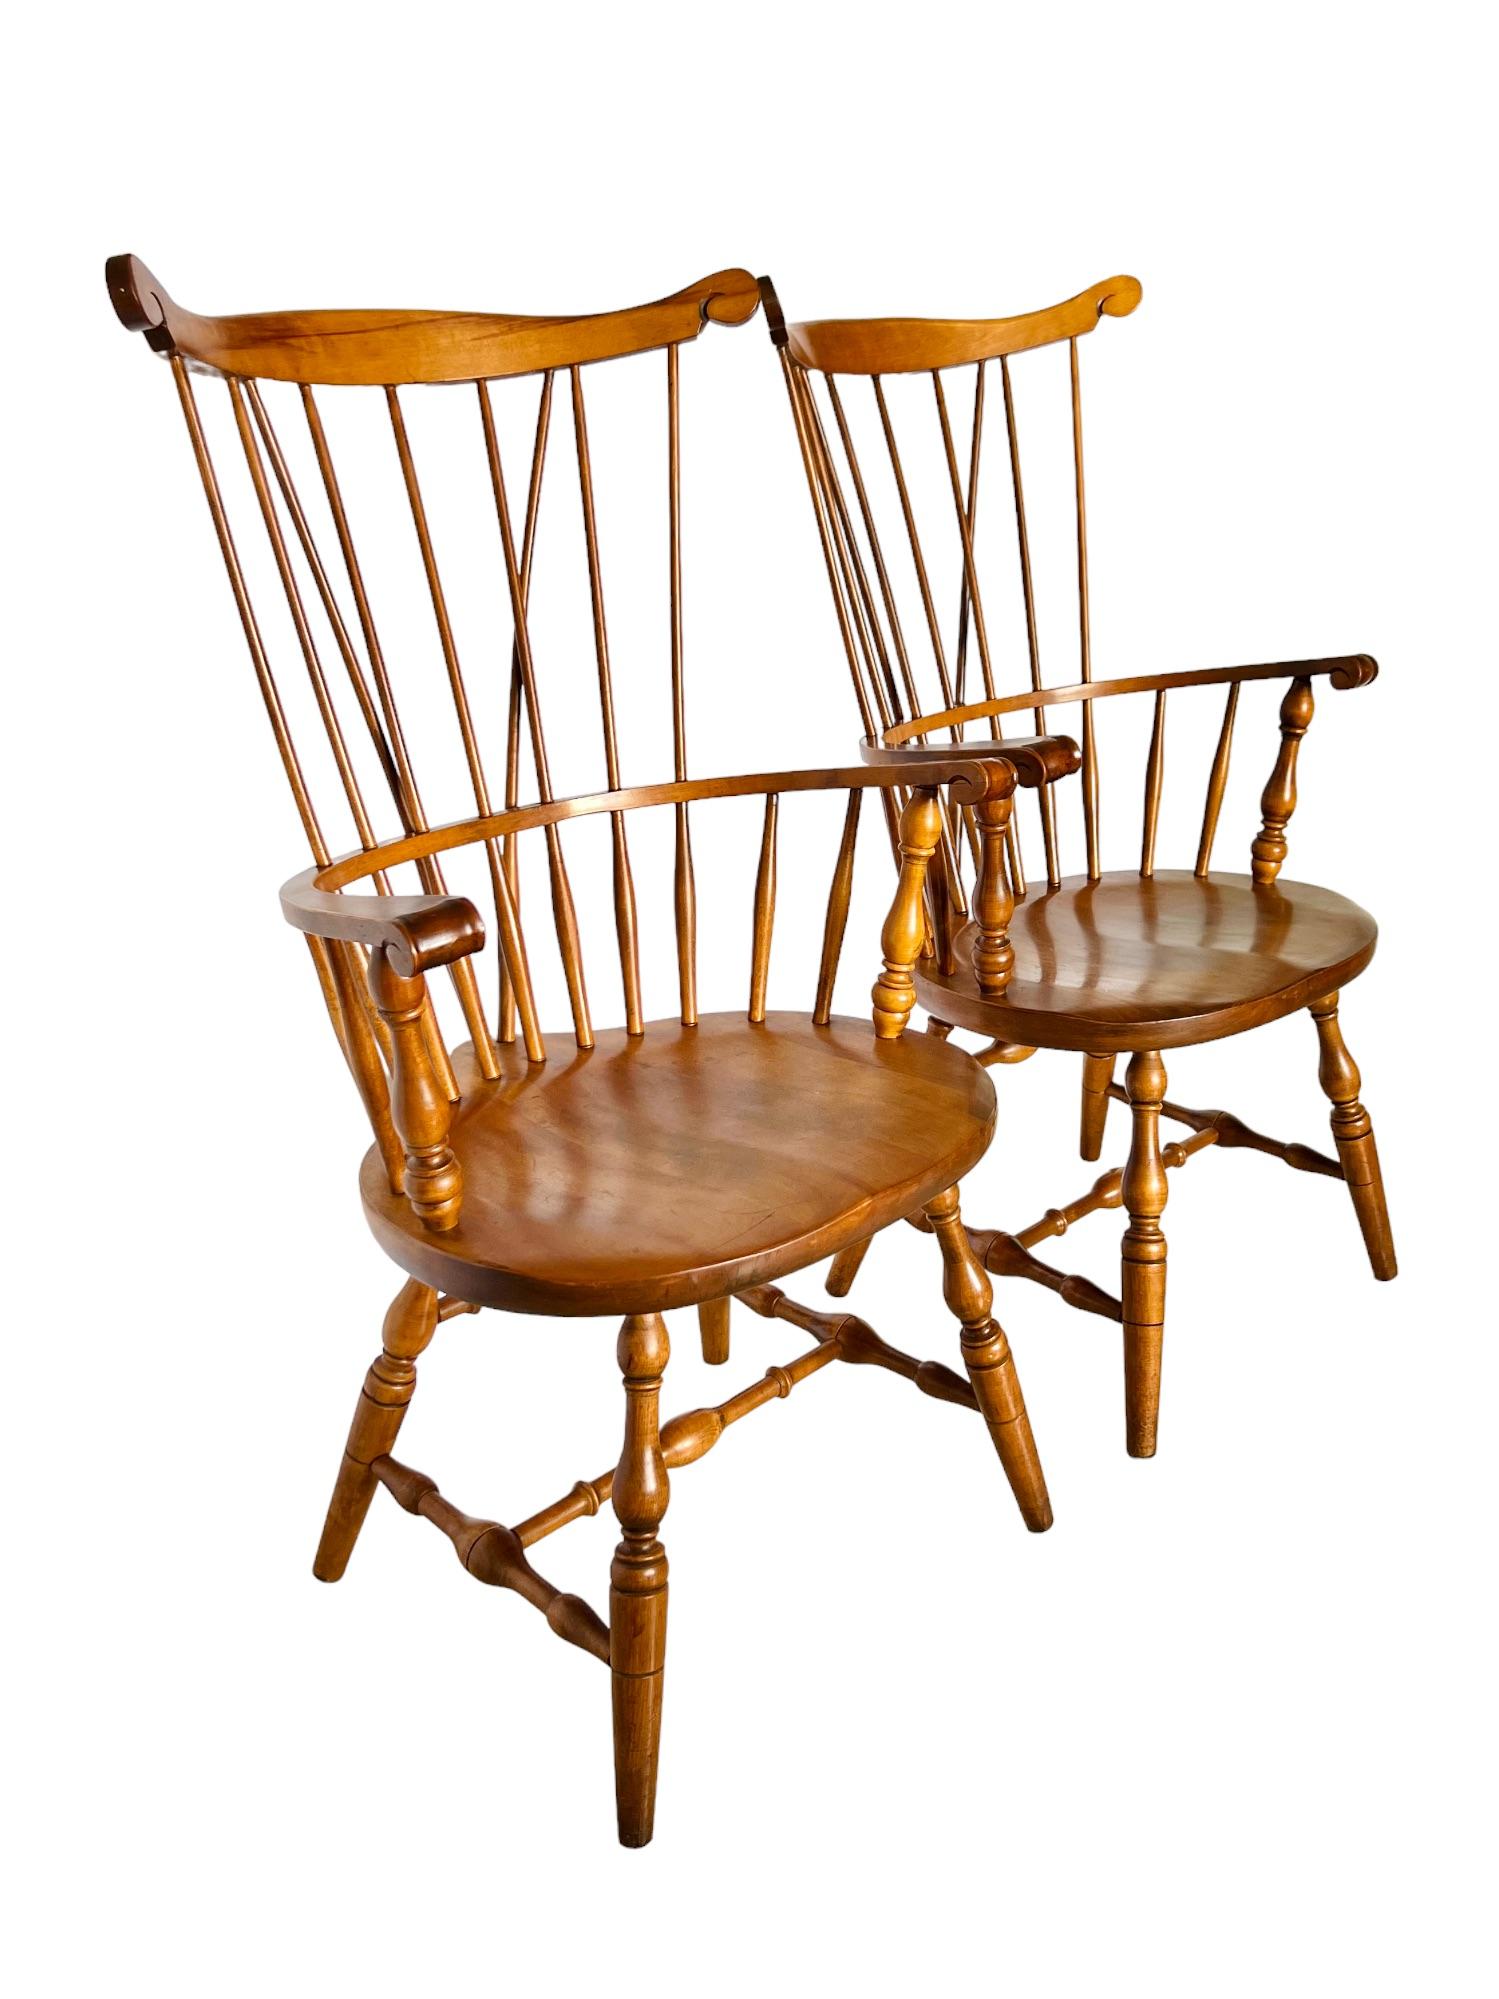 A vintage pair of comb back solid wood Windsor armchairs made by S. Bent & Bros in the early to mid 20th century. Exceptionally hand crafted entirely of maple they feature high braced backs, shaped seats, finely carved and turned details and a